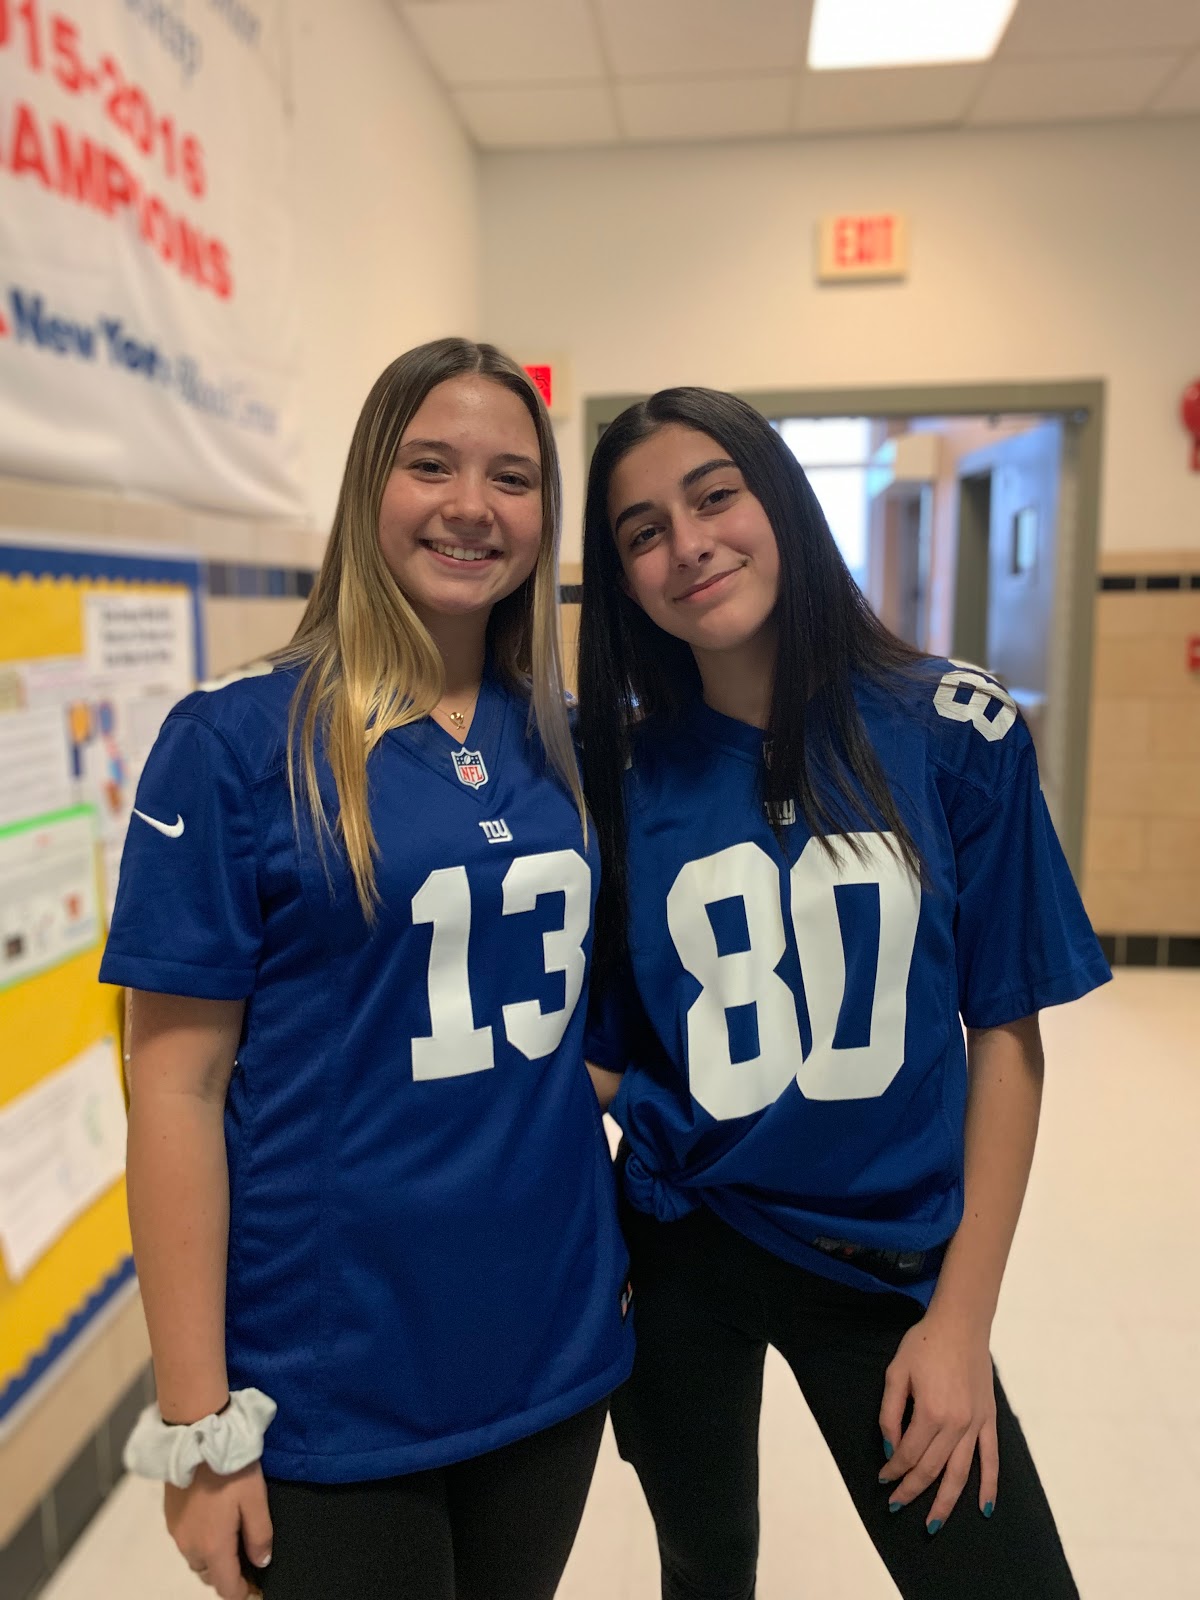 Paw Print Now: Students Go All Out for Jersey Day